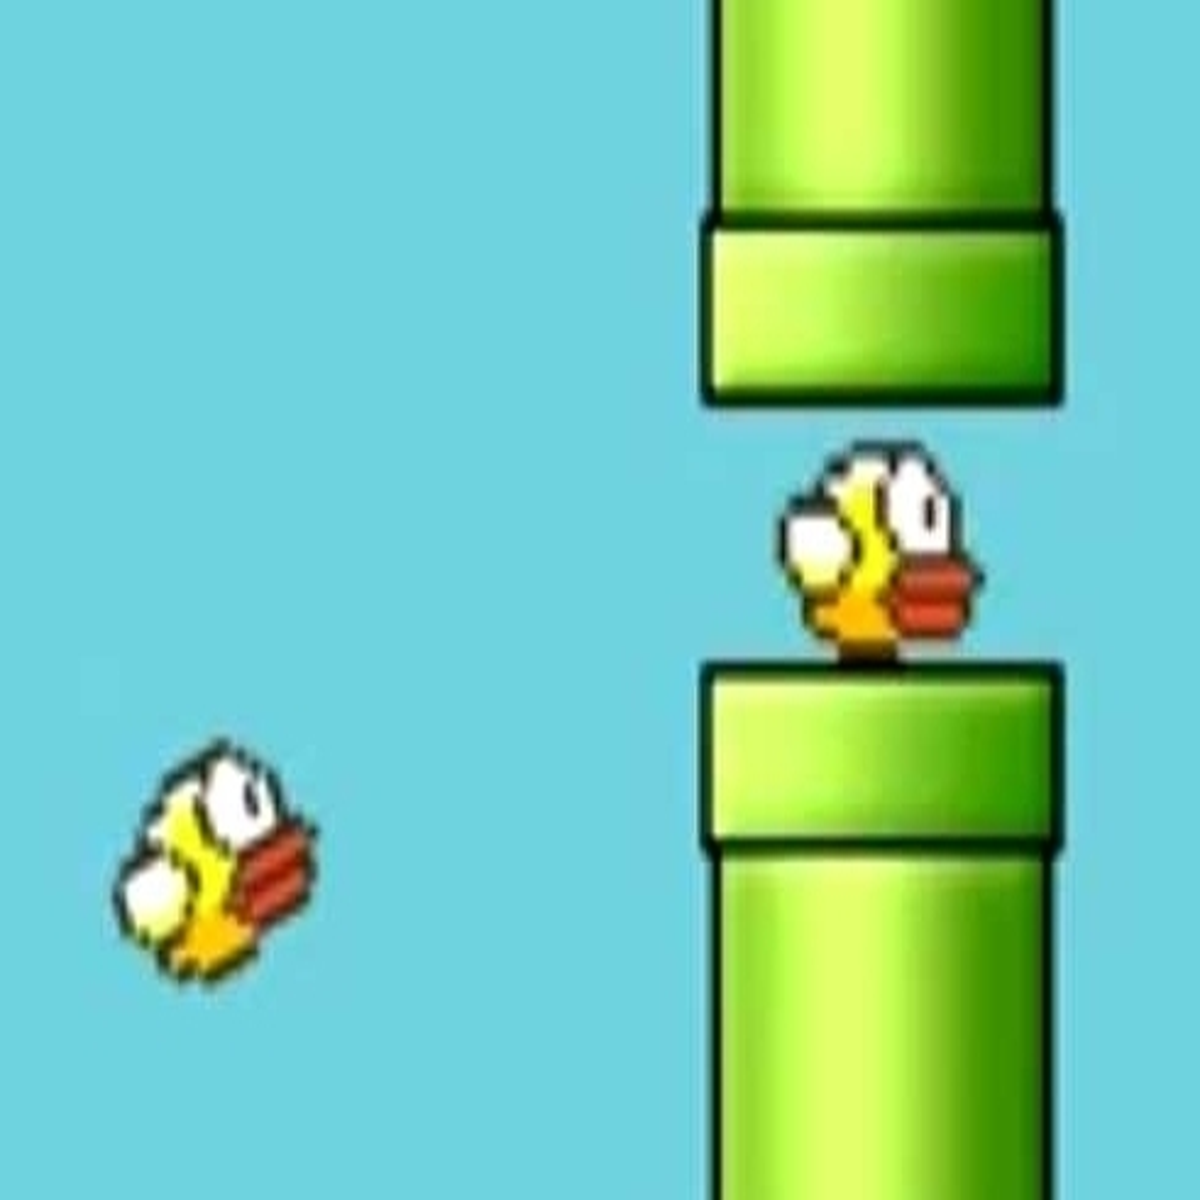 Flappy Bird game no longer for sale 